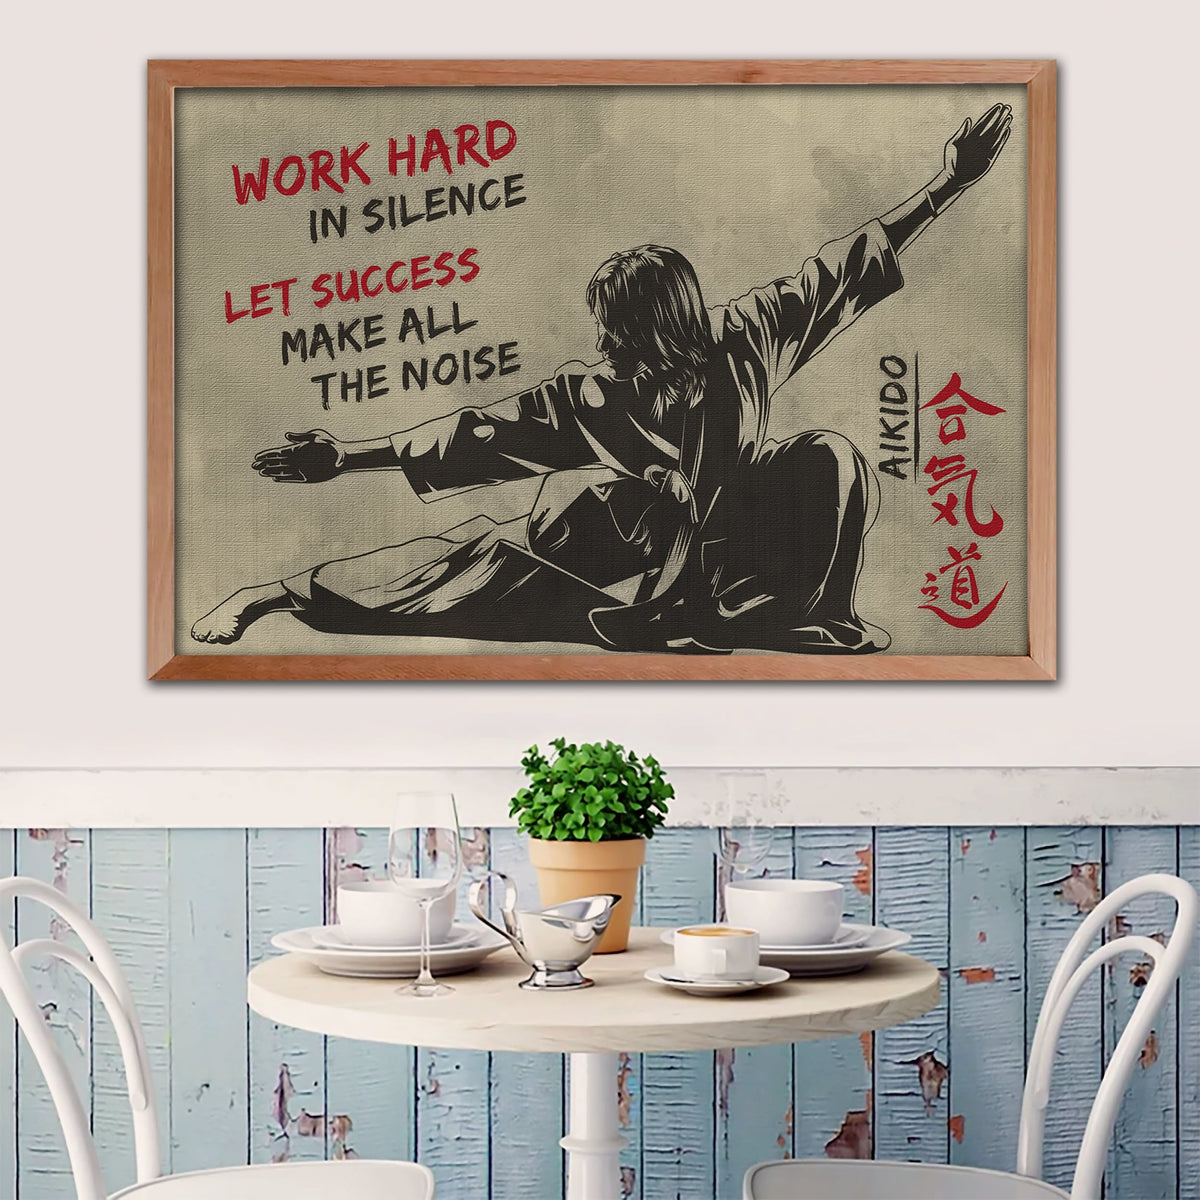 AI002 - Work Hard In Silence - Let Success Make All The Noise - Horizontal Poster - Horizontal Canvas - Aikido Poster